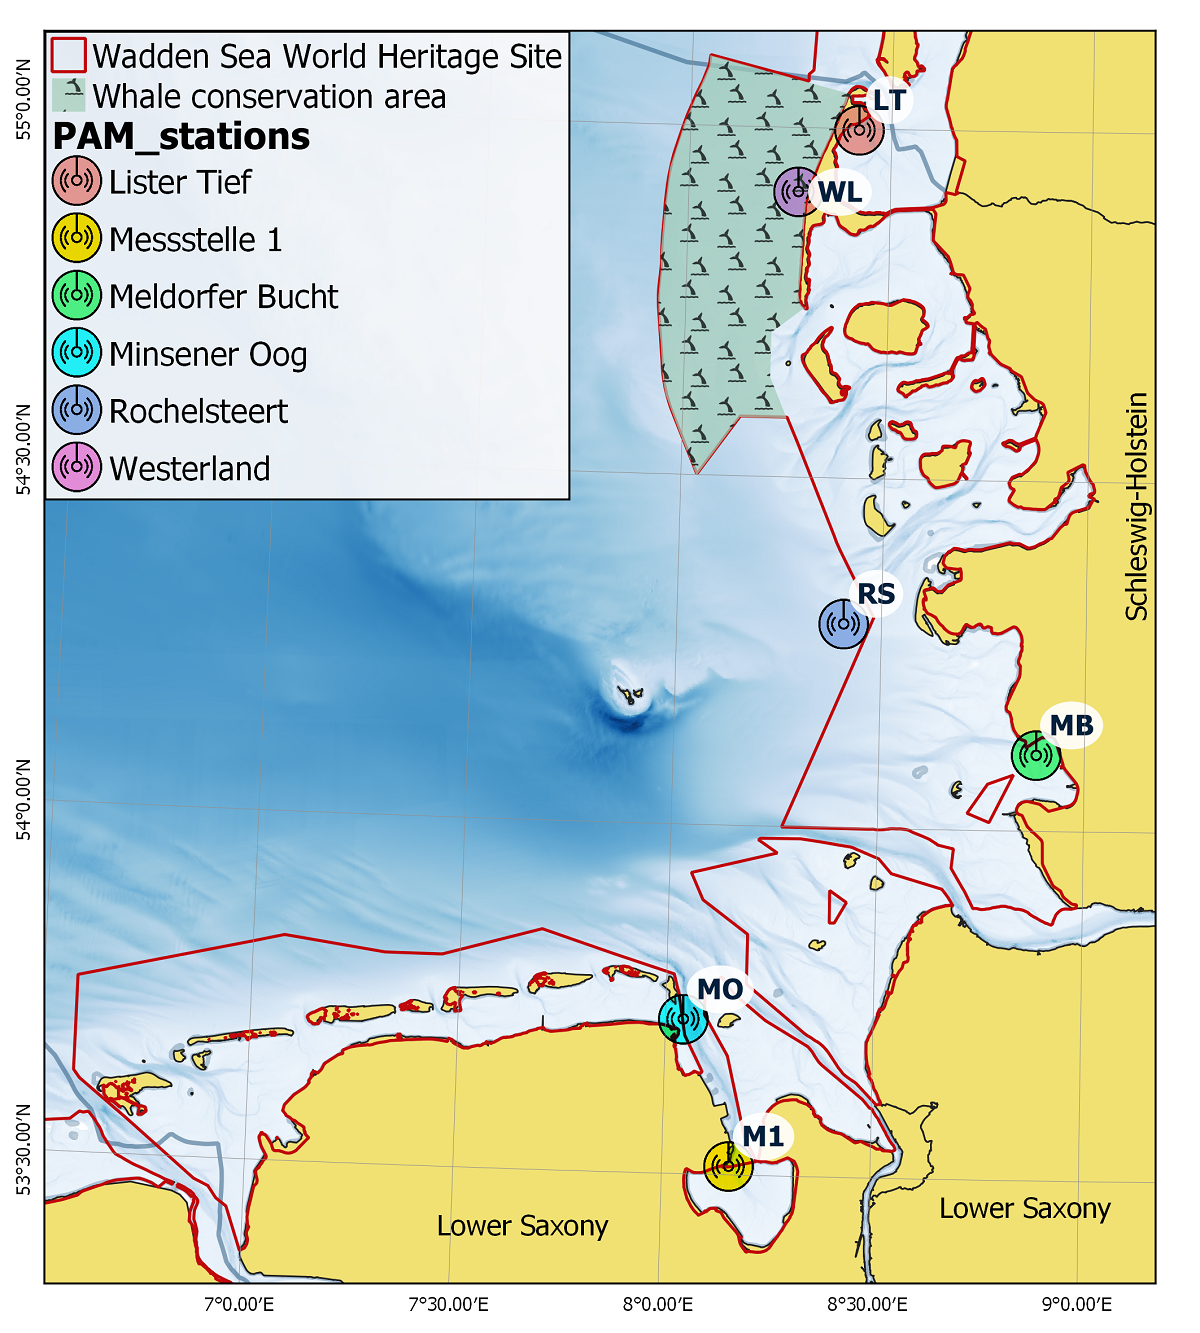 Figure 11. Positions of the PAM stations in the German part of the Wadden Sea world Heritage Site (from Scheidat et al. (under review)).